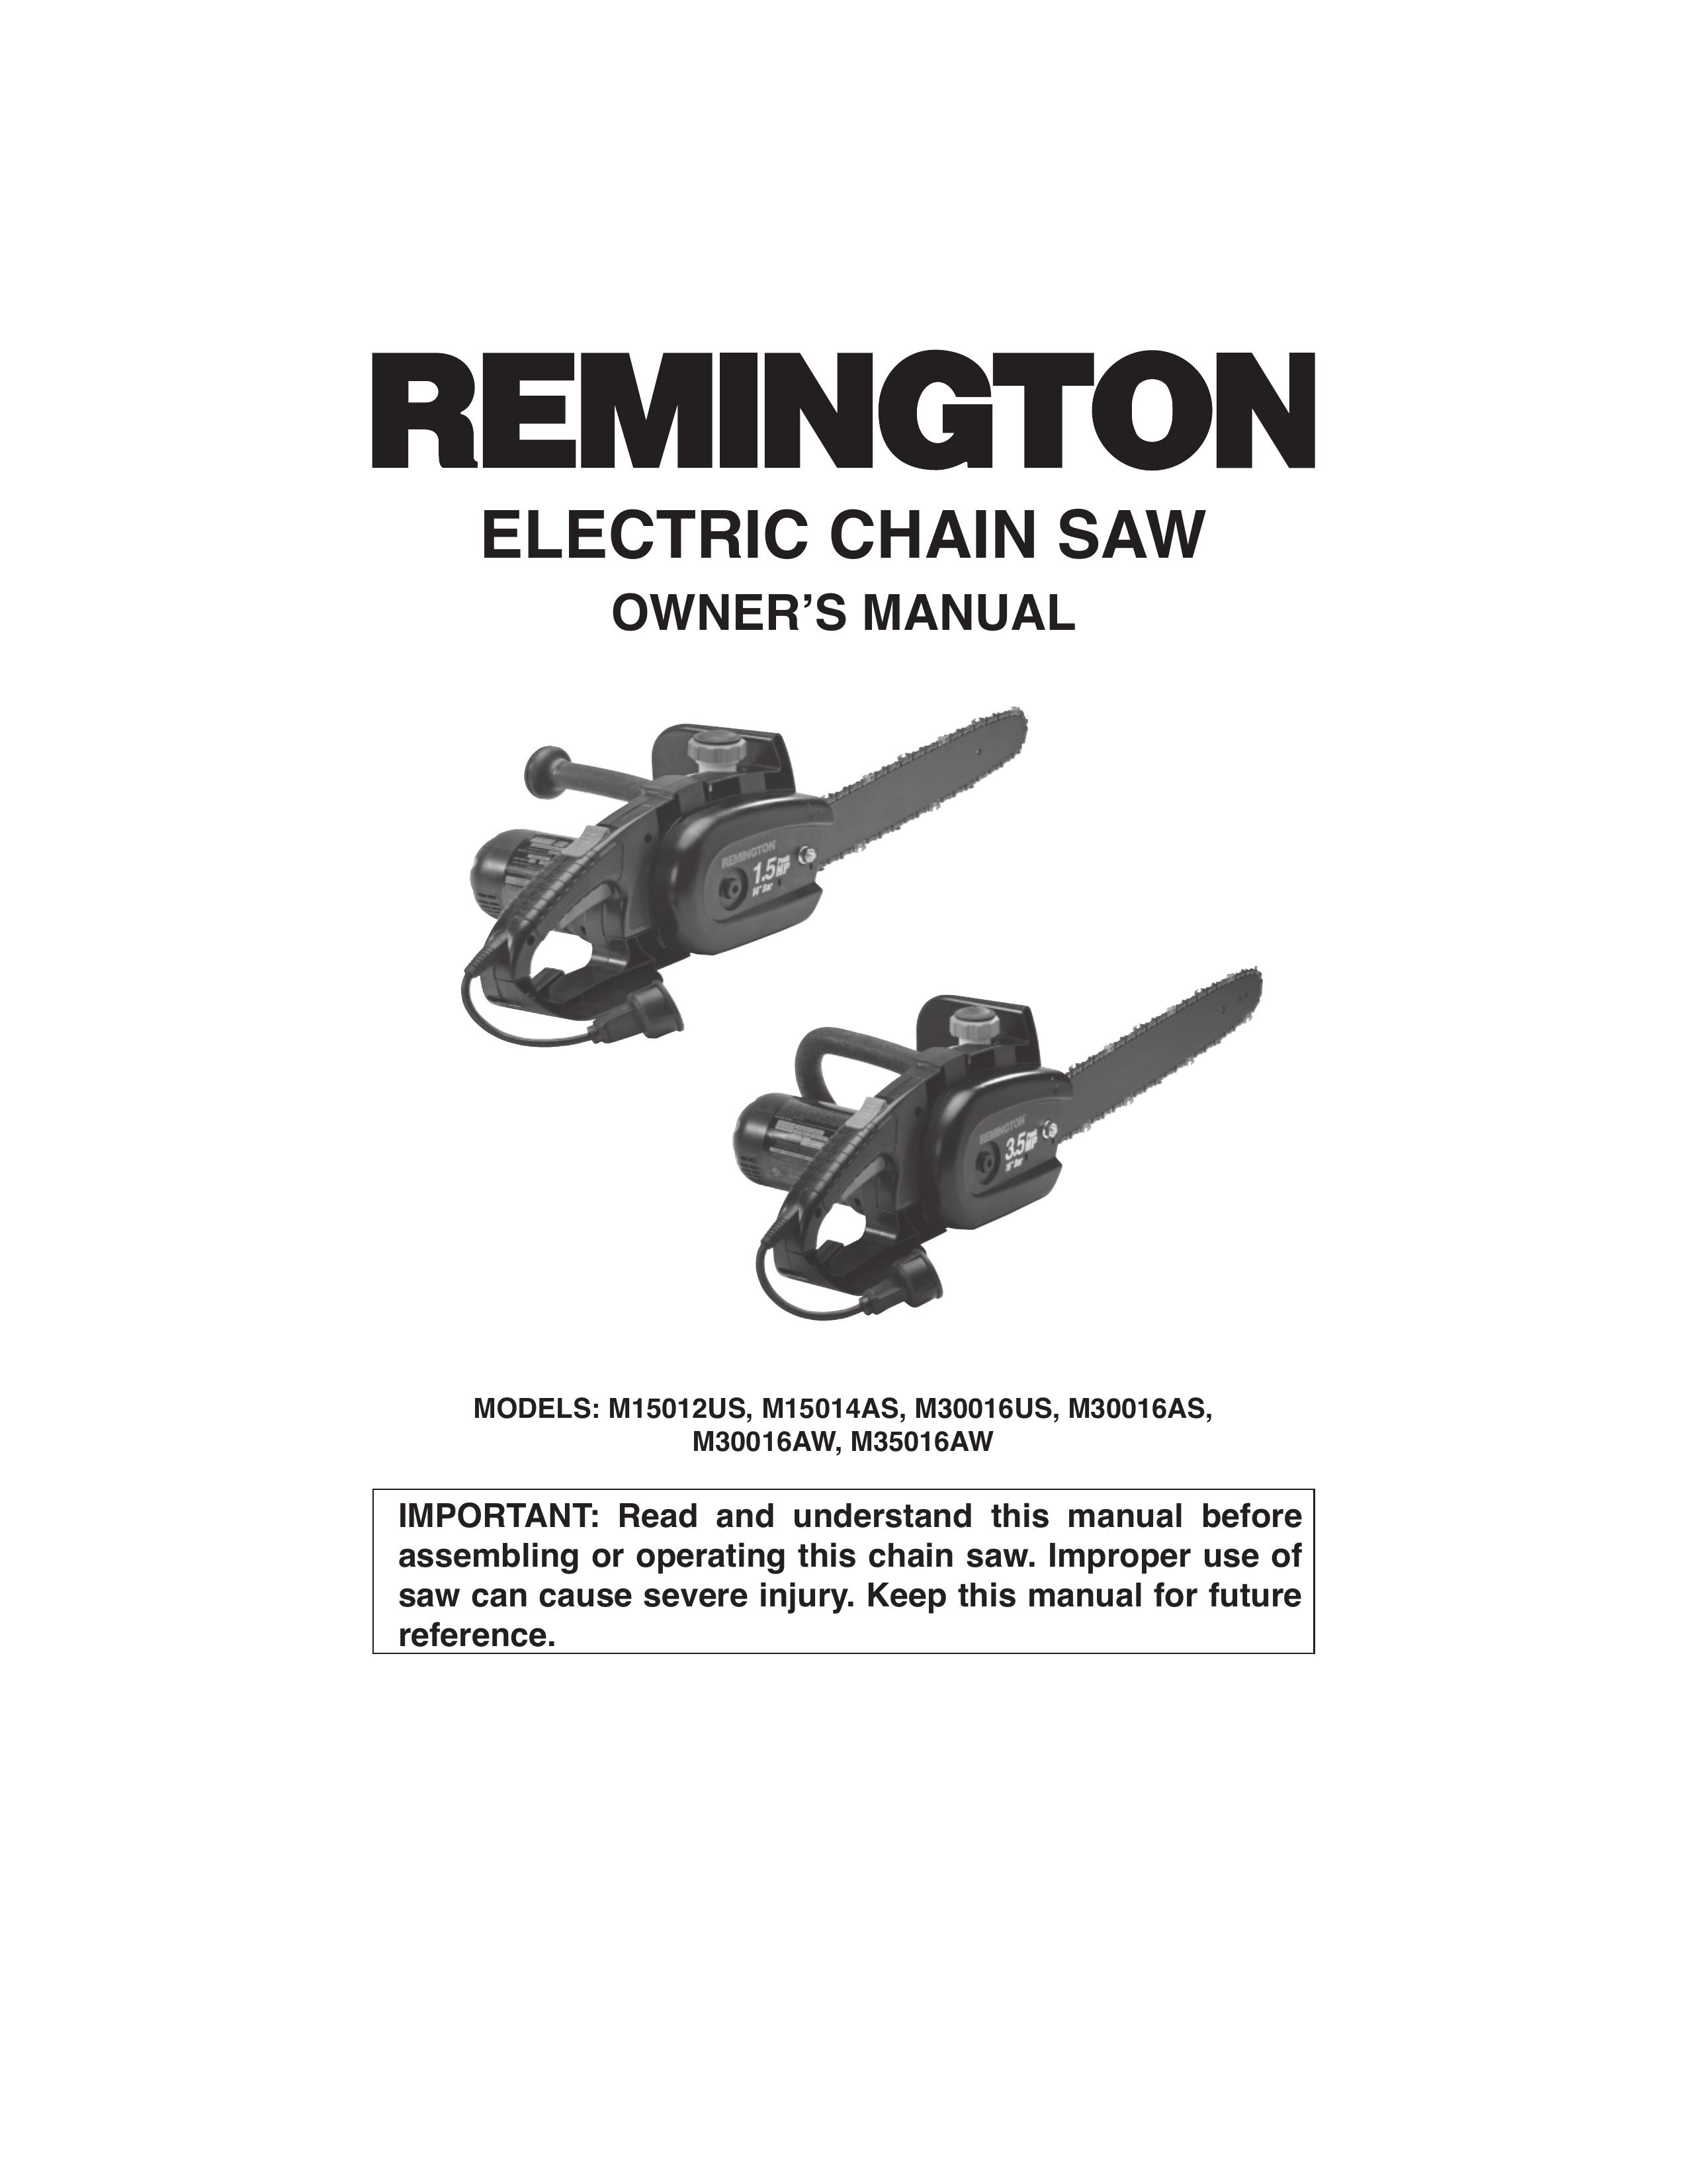 Remington Power Tools M30016AW Chainsaw User Manual